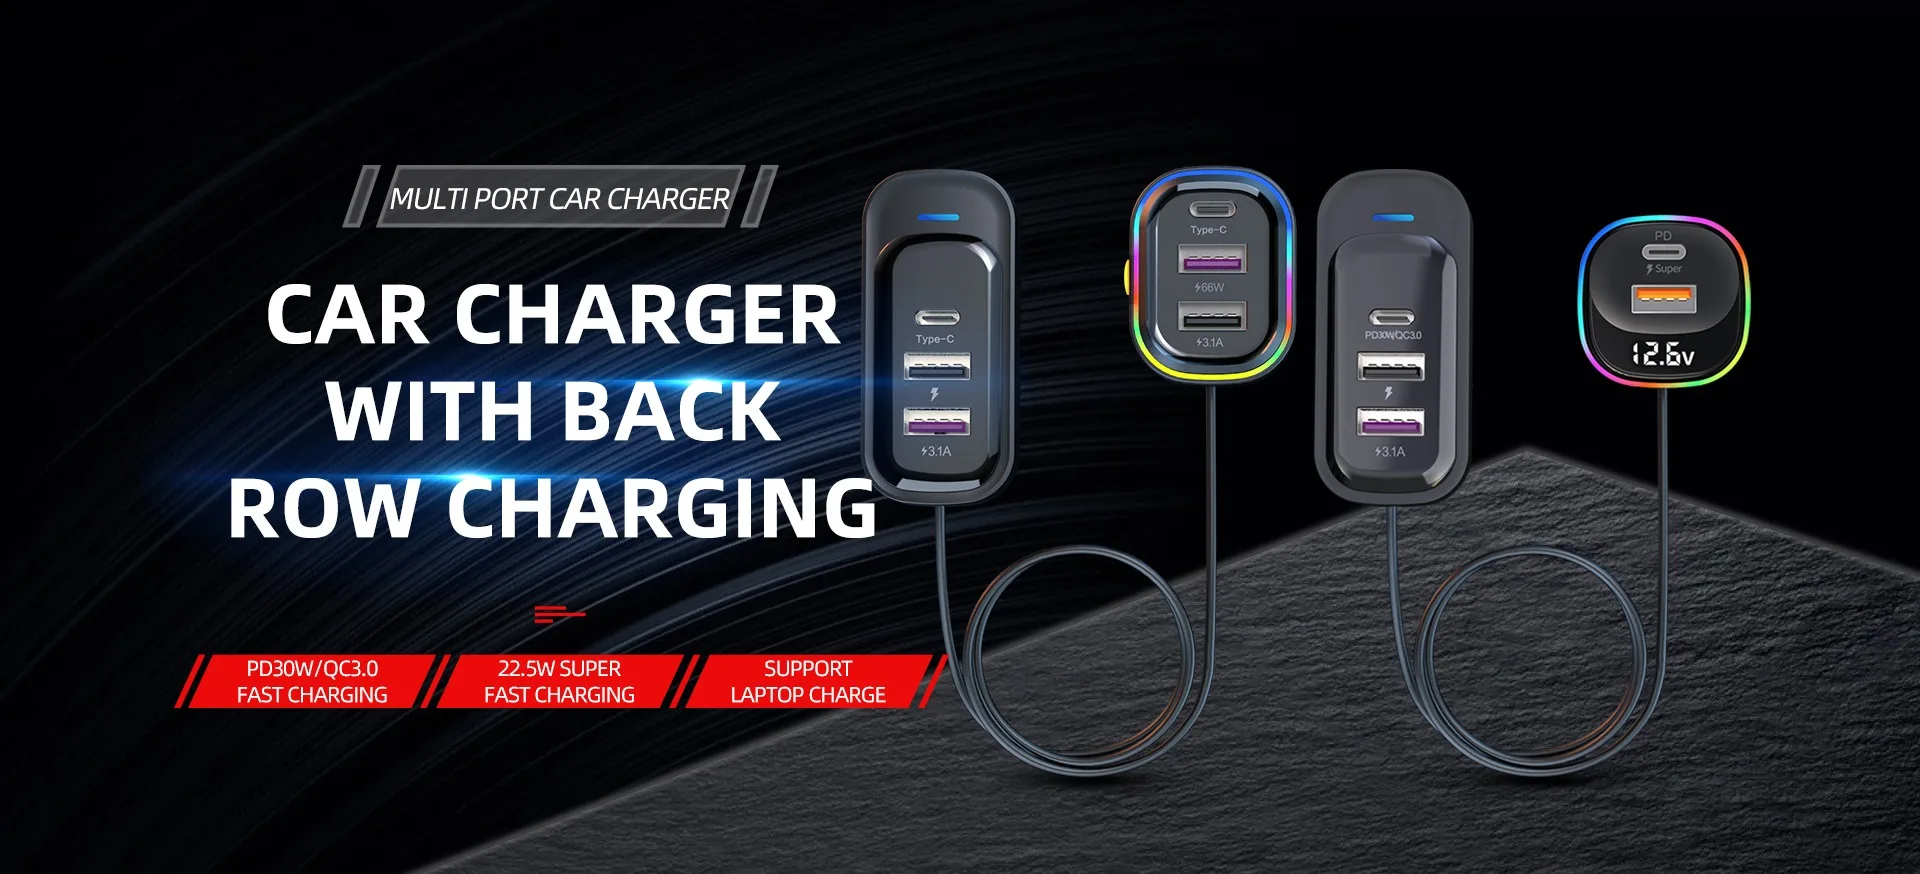 Car Charger with back row charge